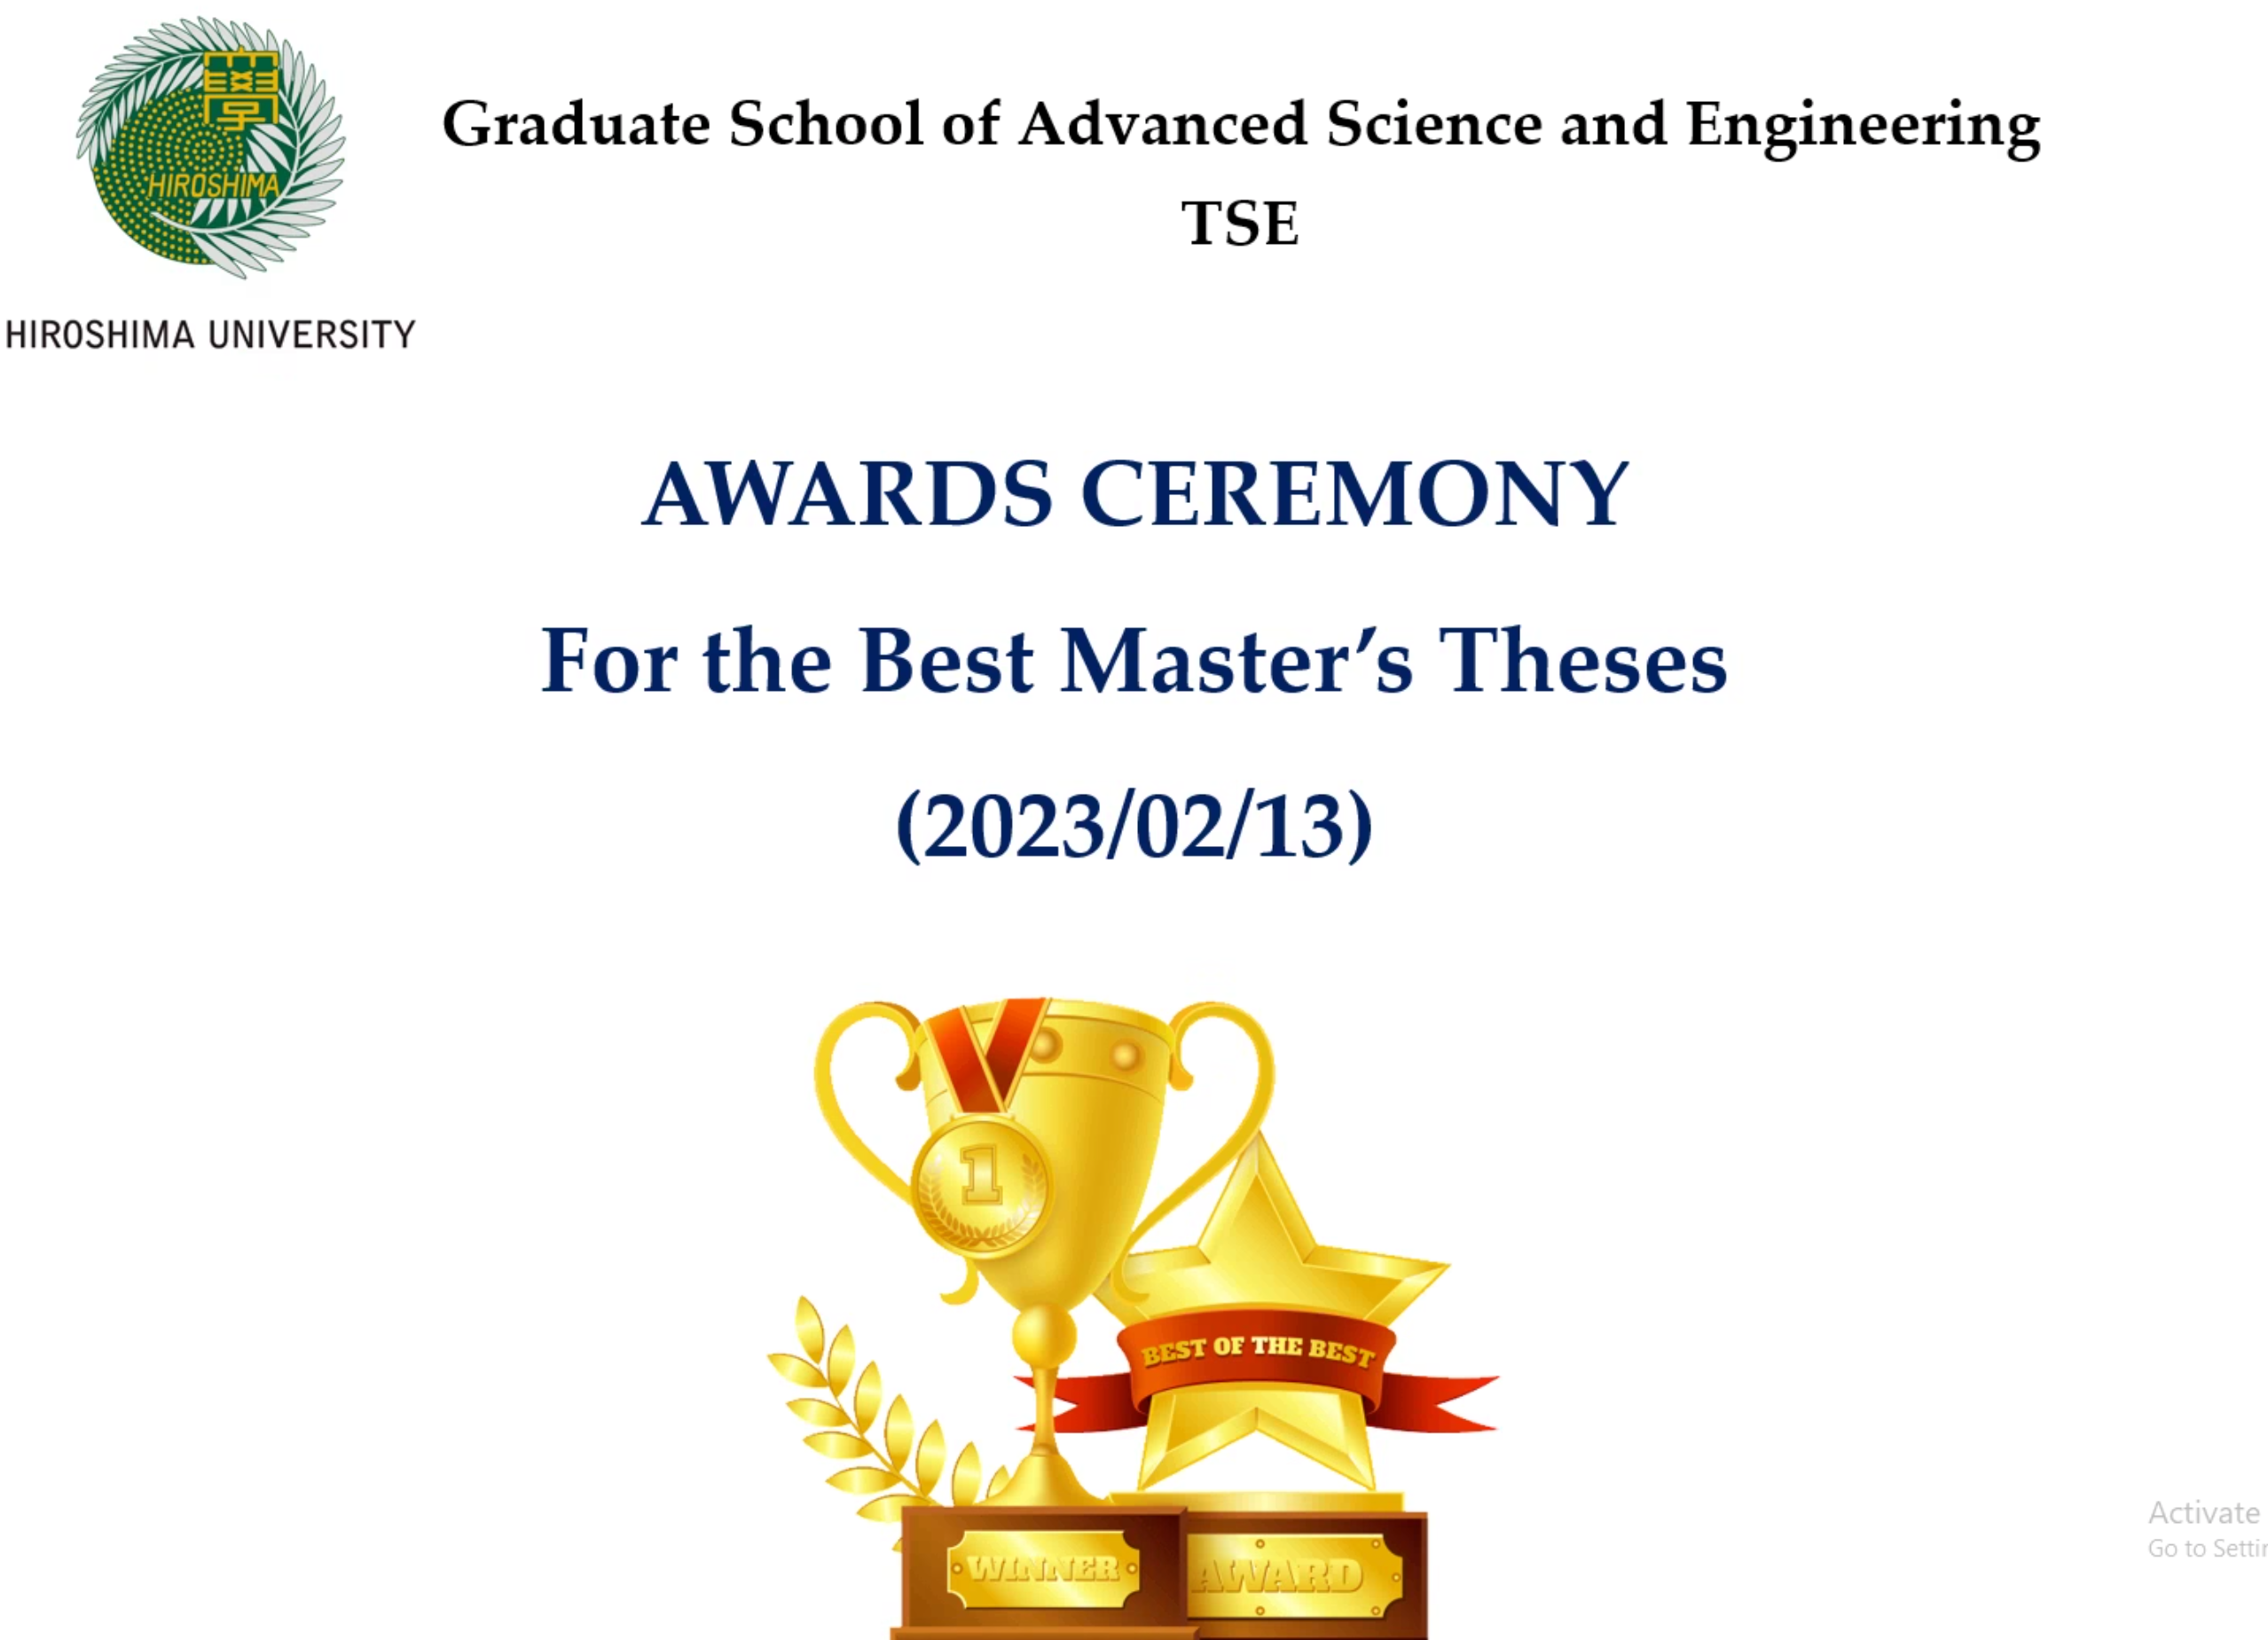 The best master thesis awards